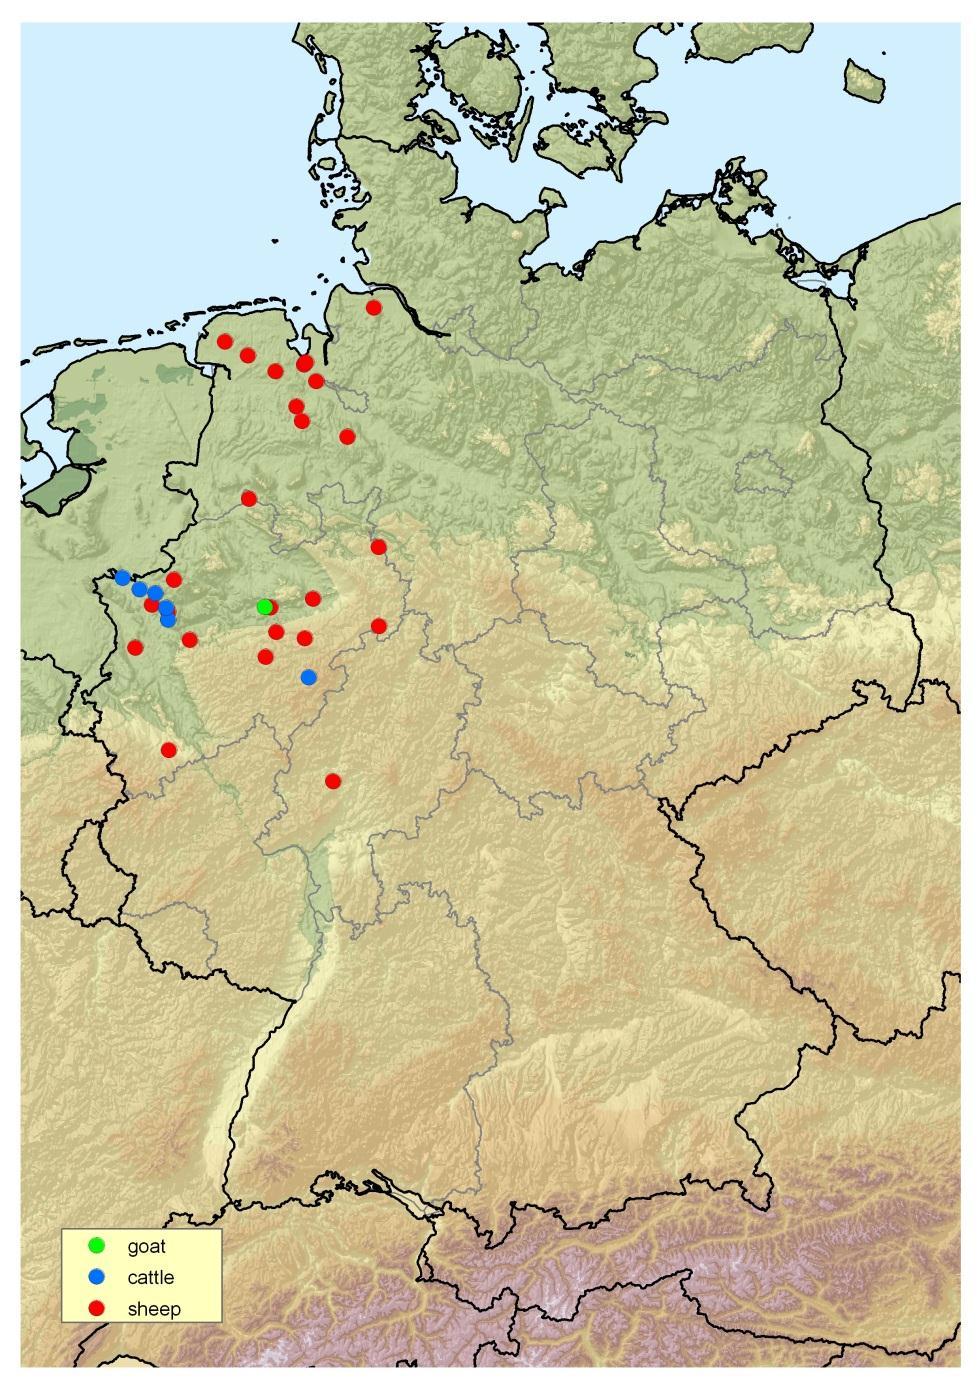 Epidemiological situation First cases in Germany Species Cattle Sheep